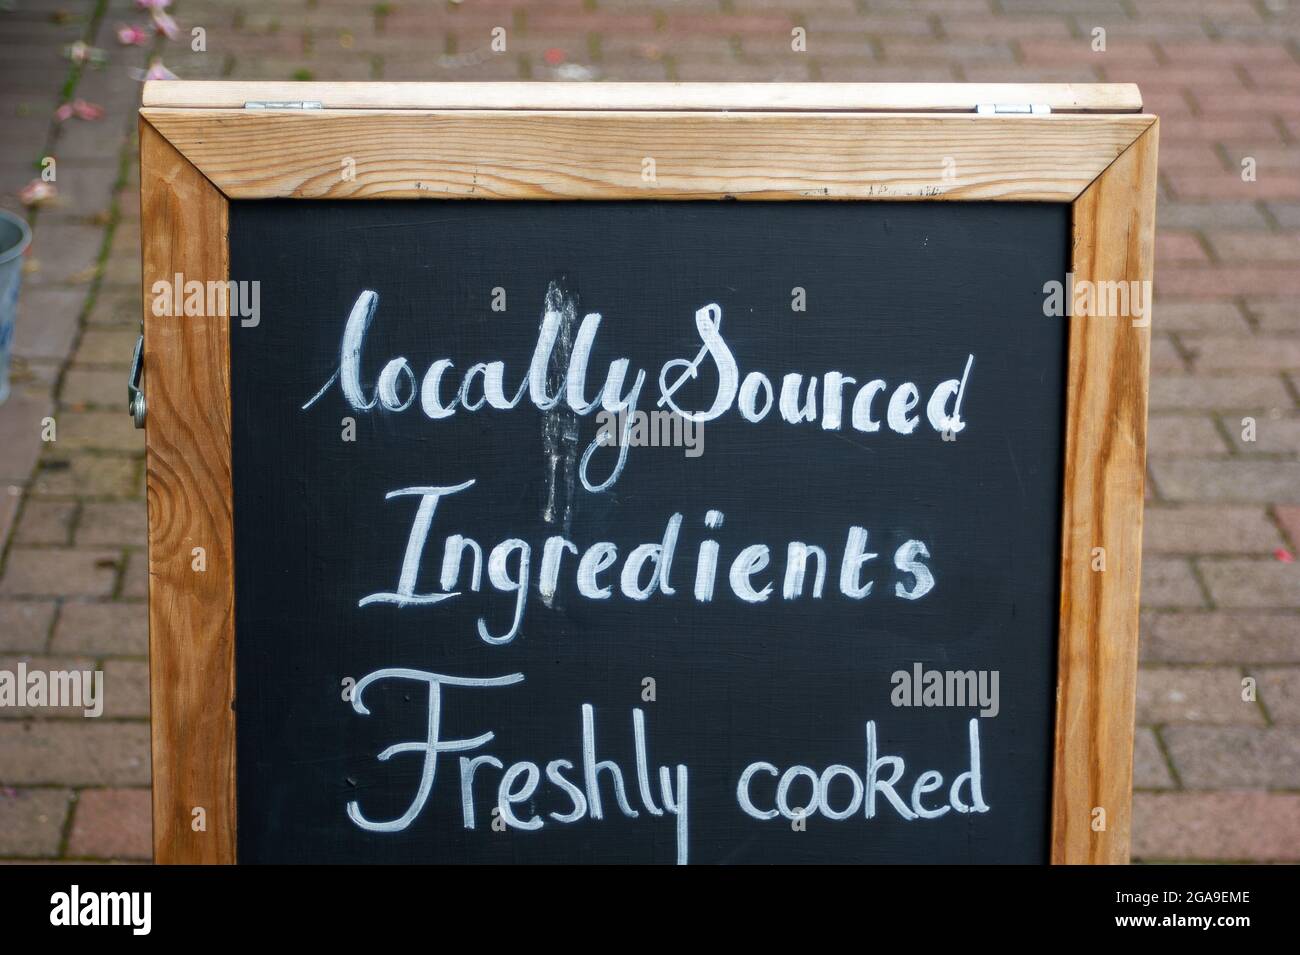 Chesham, Buckinghamshire, UK. 28th July, 2021. A locally sourced ingredients sign outside a pub in Chesham. Credit: Maureen McLean/Alamy Stock Photo